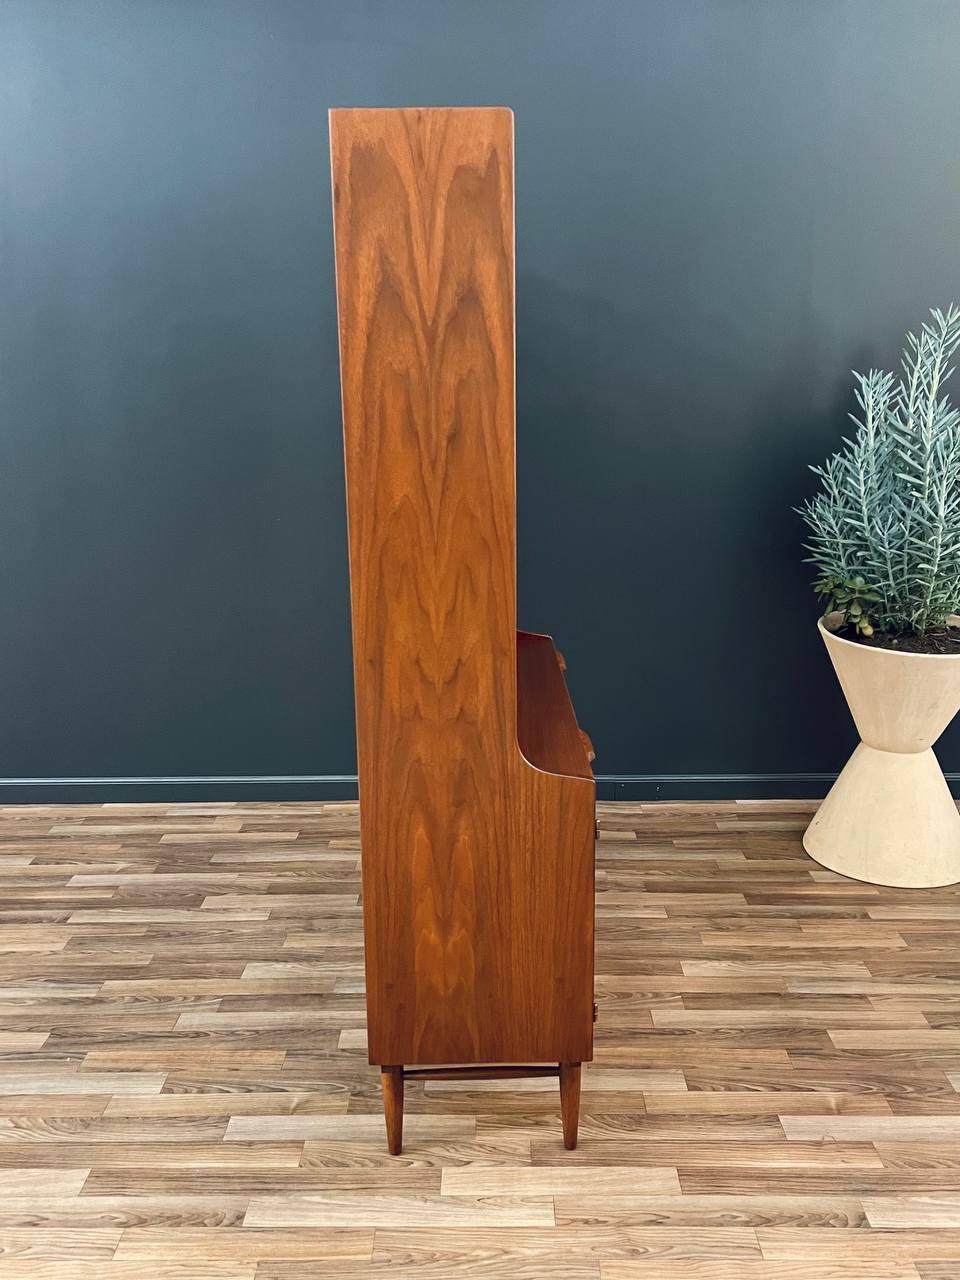 Newly Refinished - Vintage Danish Modern Walnut Bookshelf Cabinet In Excellent Condition For Sale In Los Angeles, CA